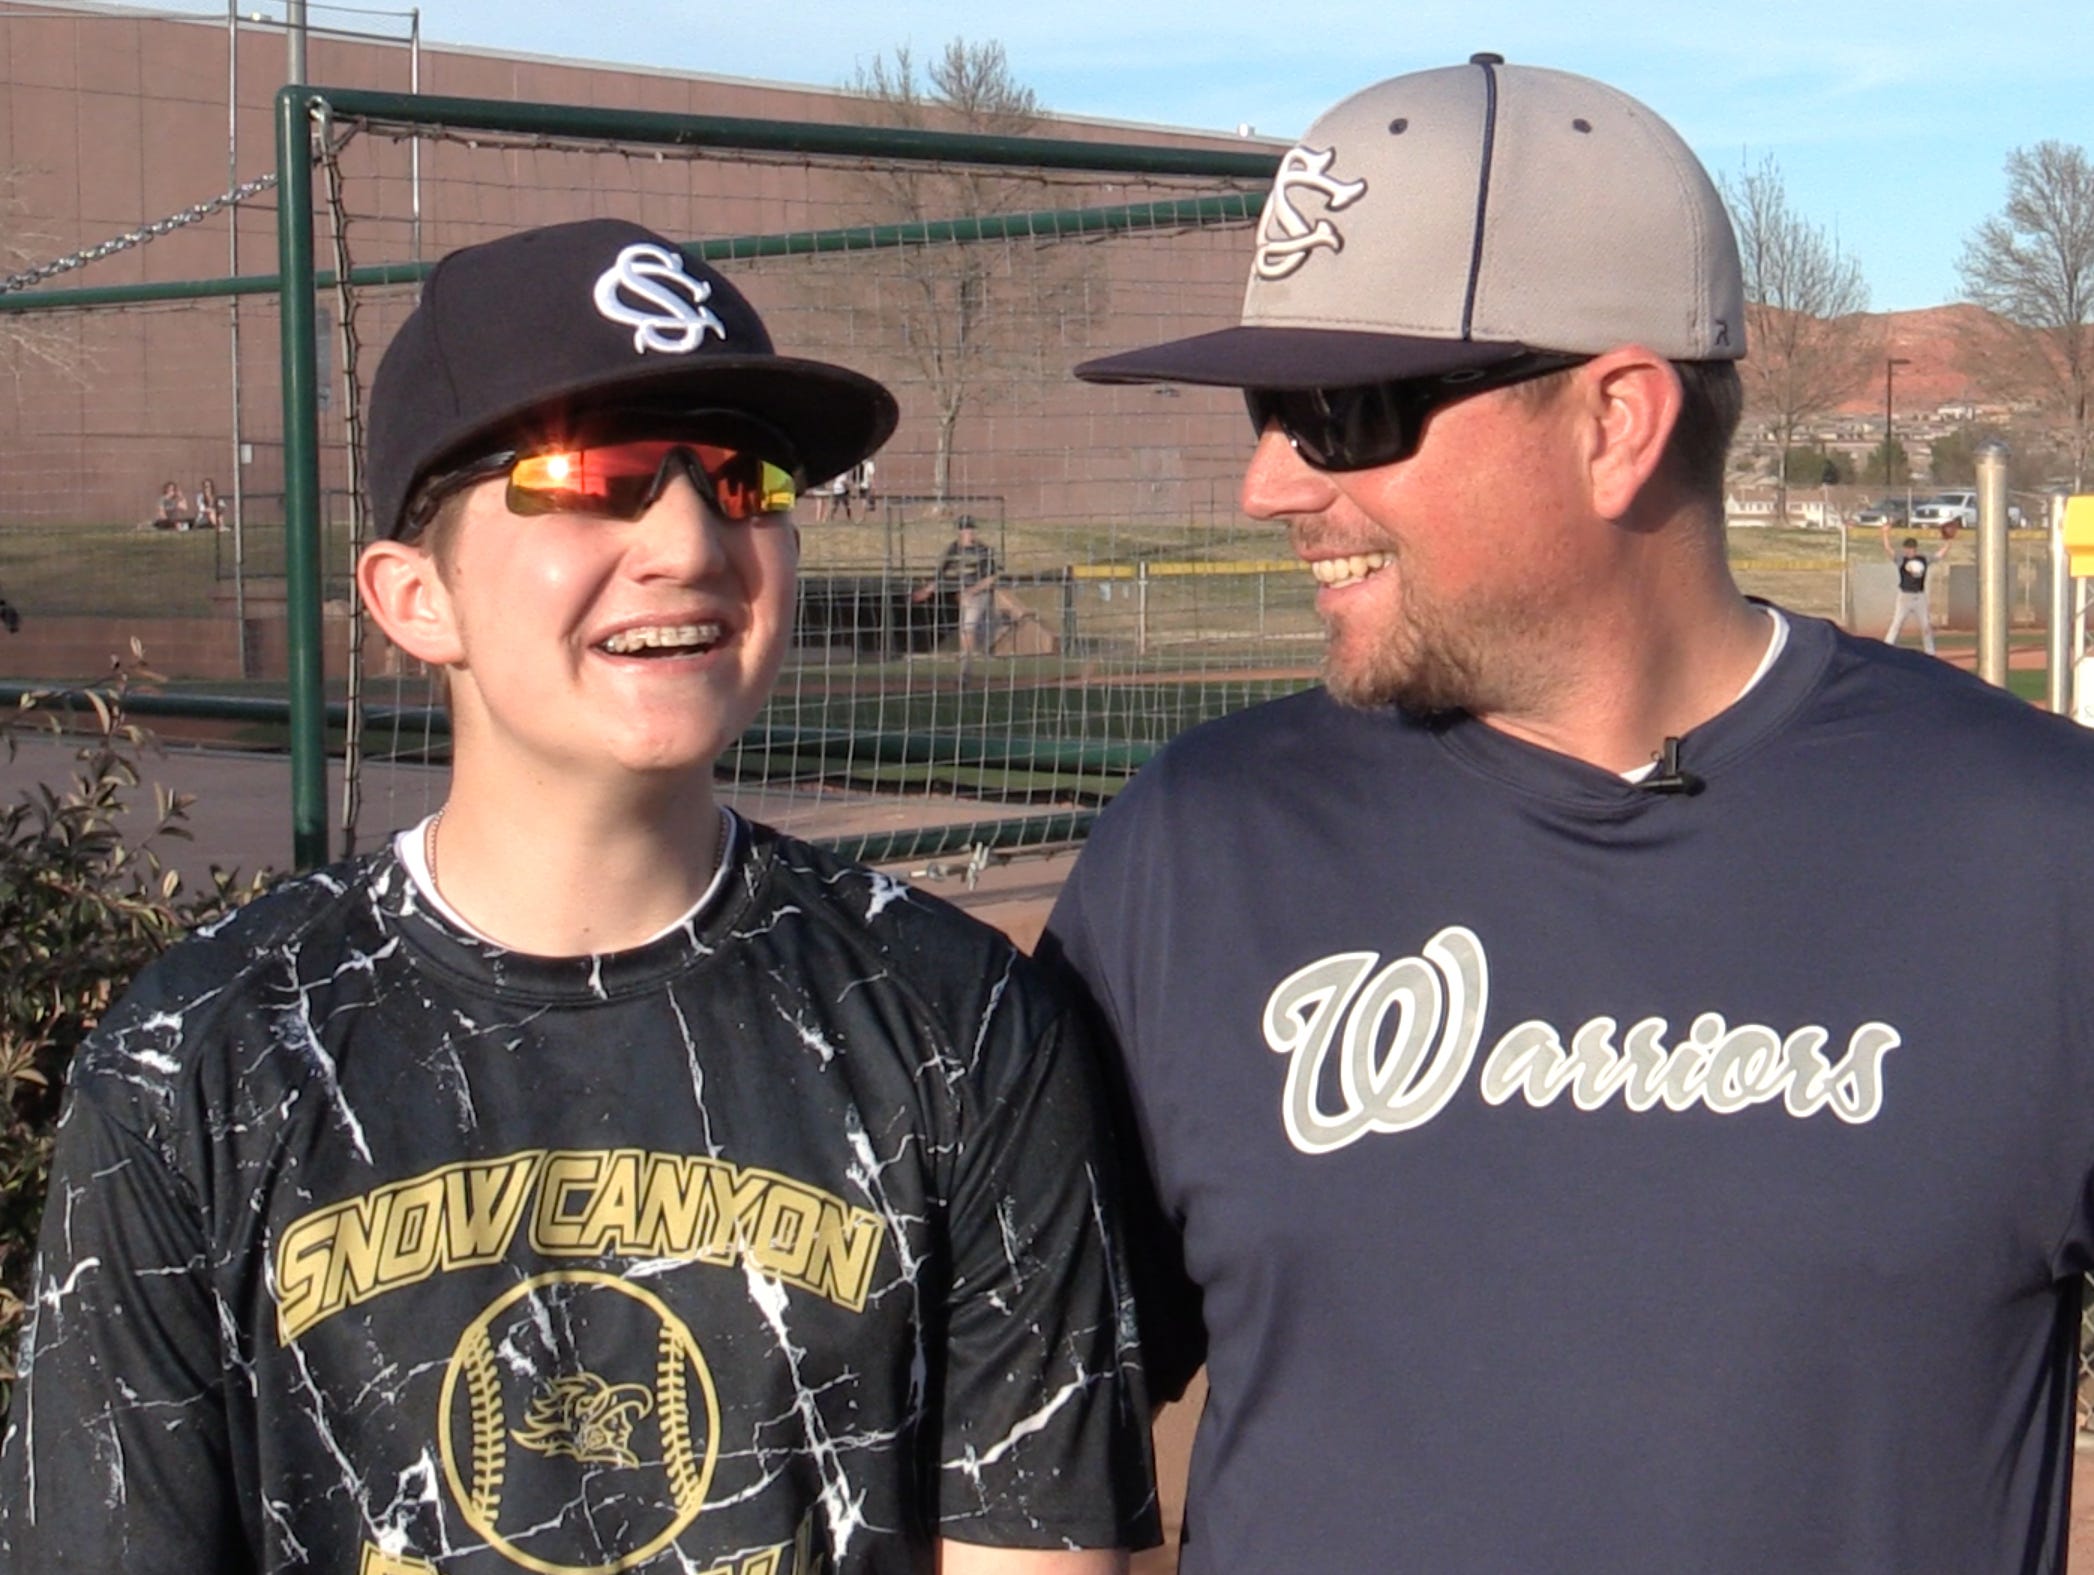 Britton Shipp, and his father Jesse Shipp, discuss his recovery and the role of baseball in their lives Wednesday, March 2, 2016.